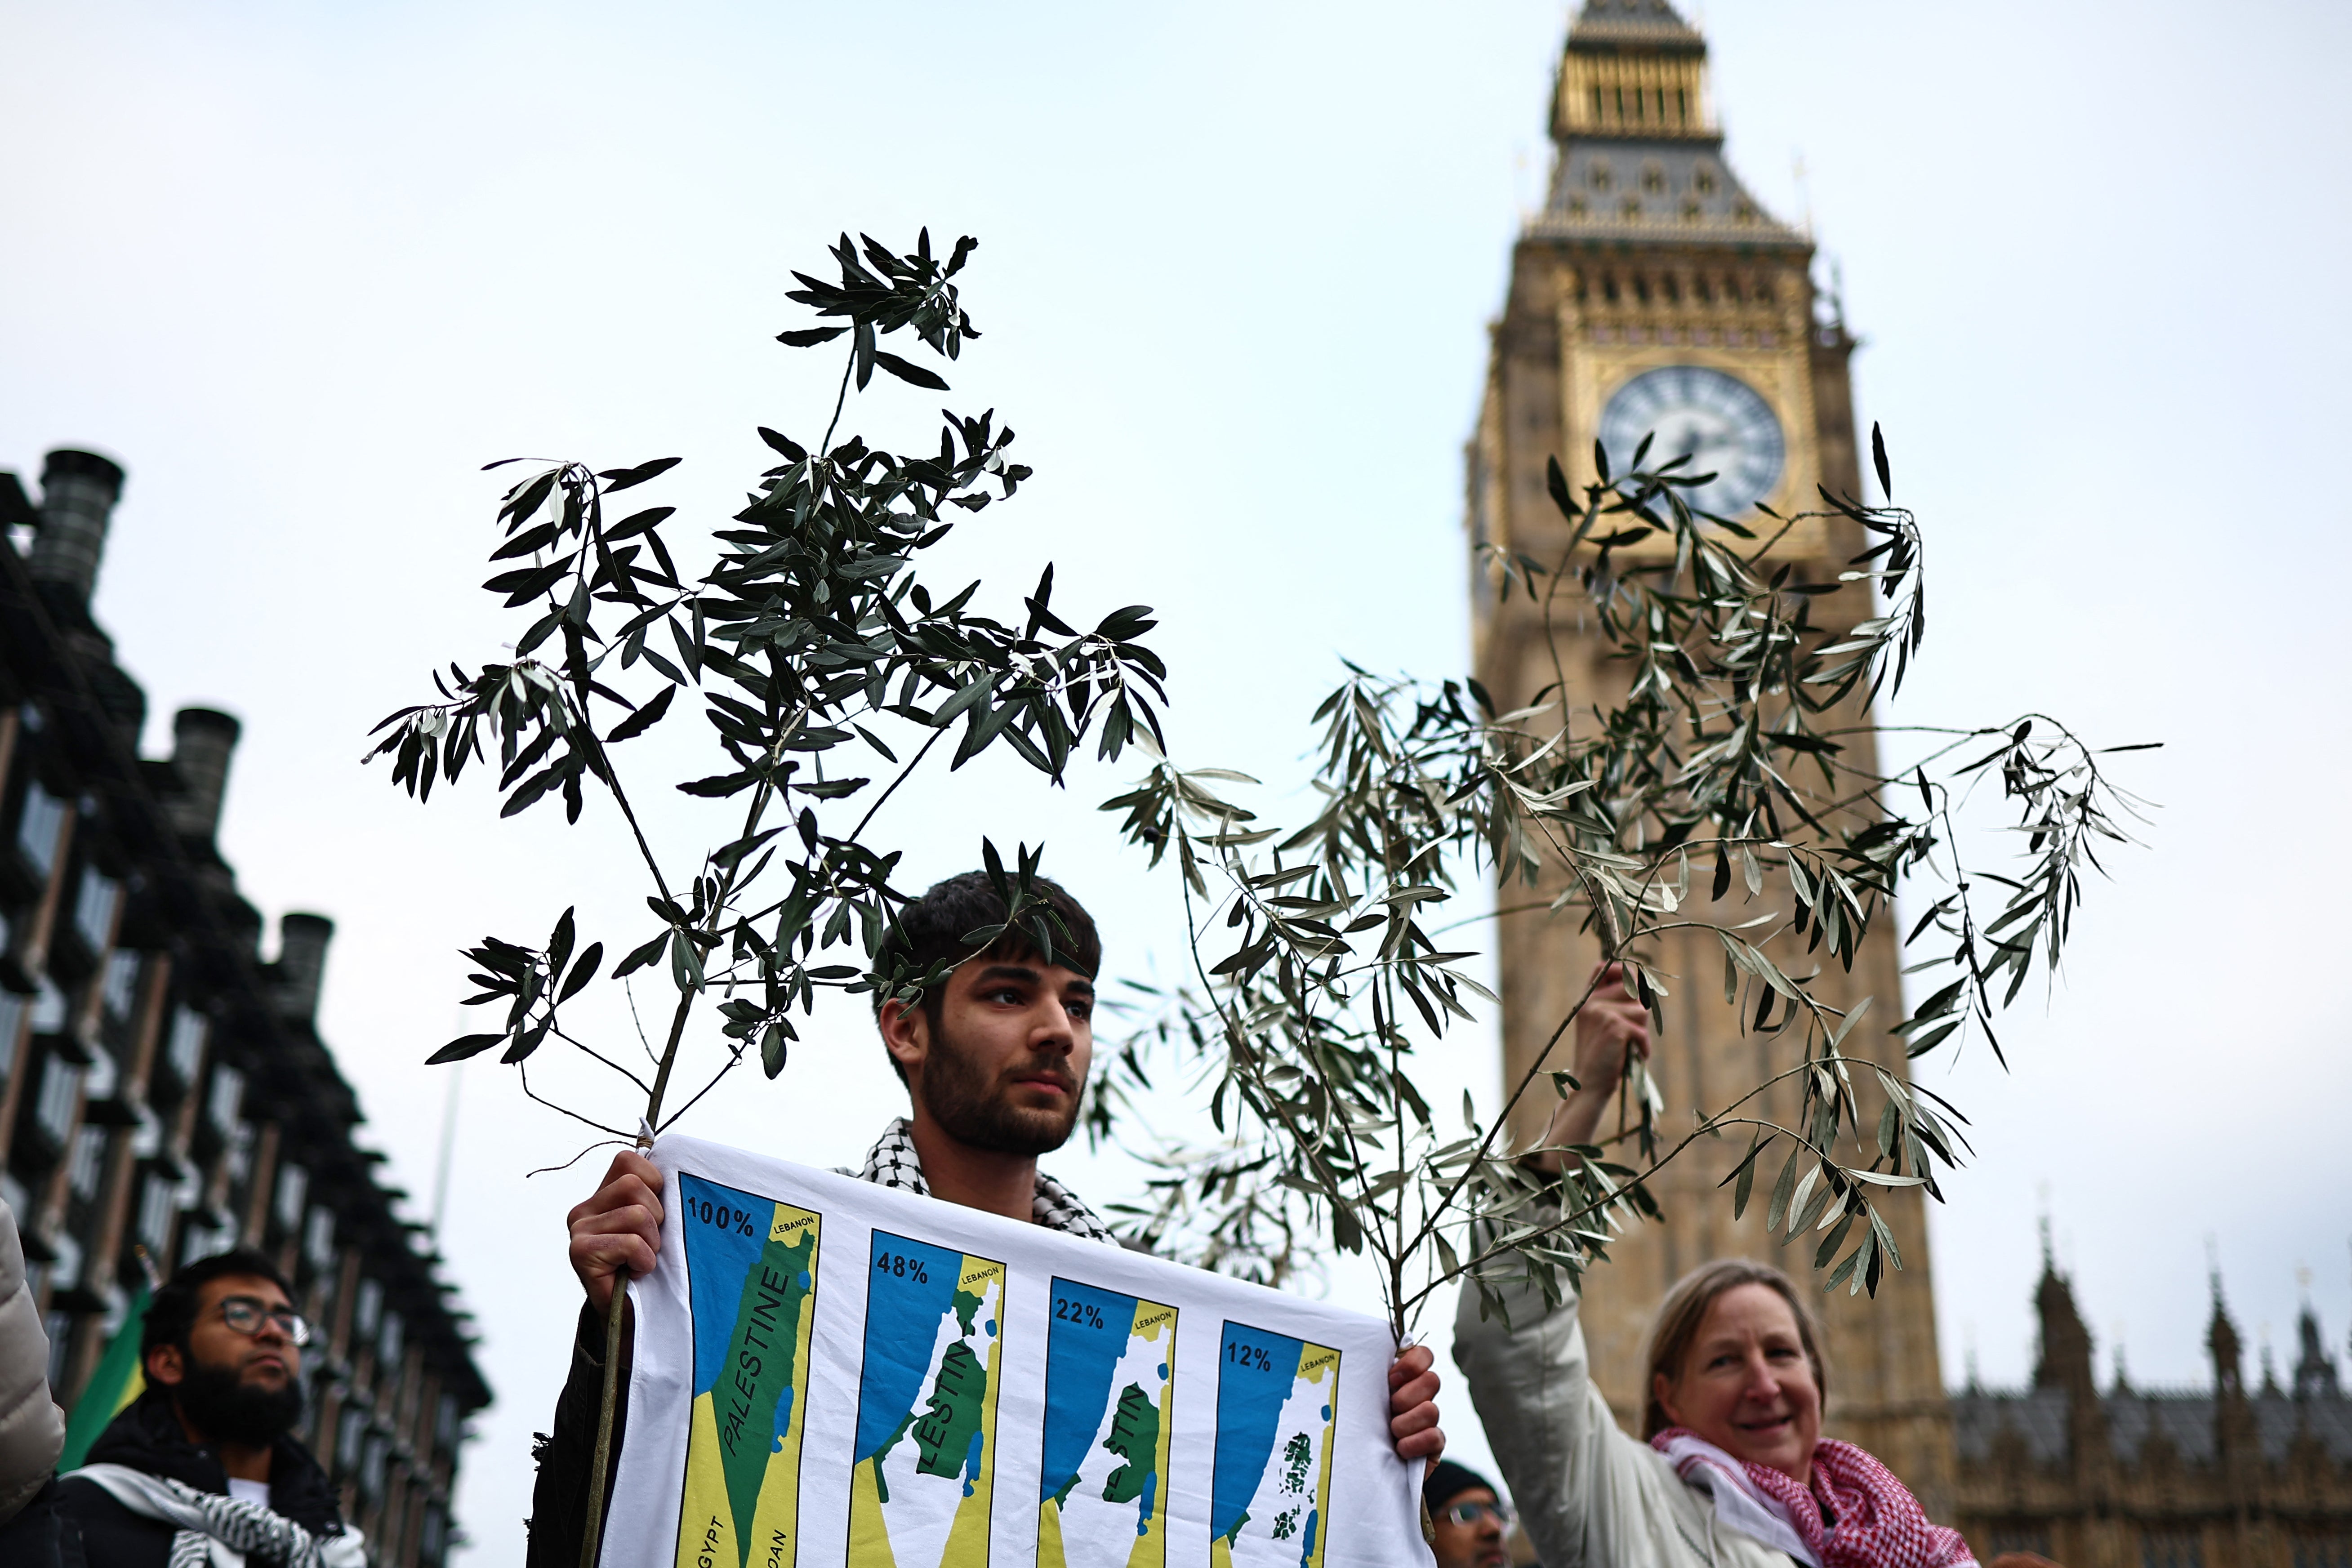 Pro-Palestinian activists and supporters hold olive branches as peace symbols